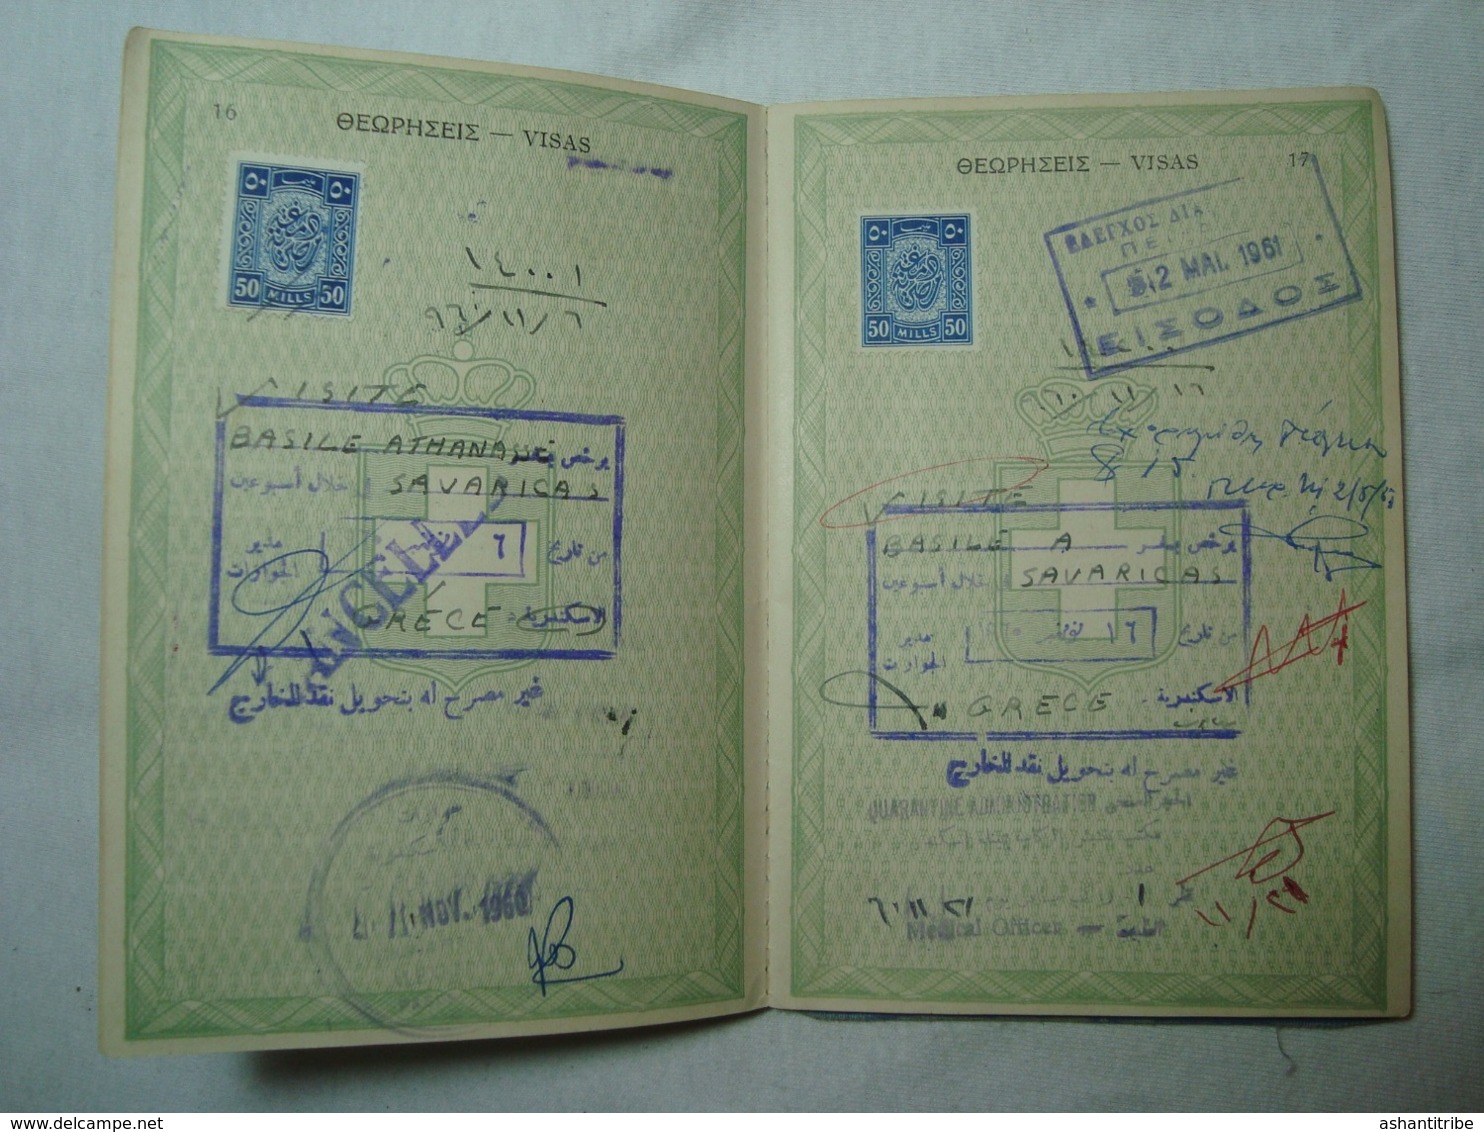 Greece passport reisepass passeport 1946 with many interesting revenues and ink stamps